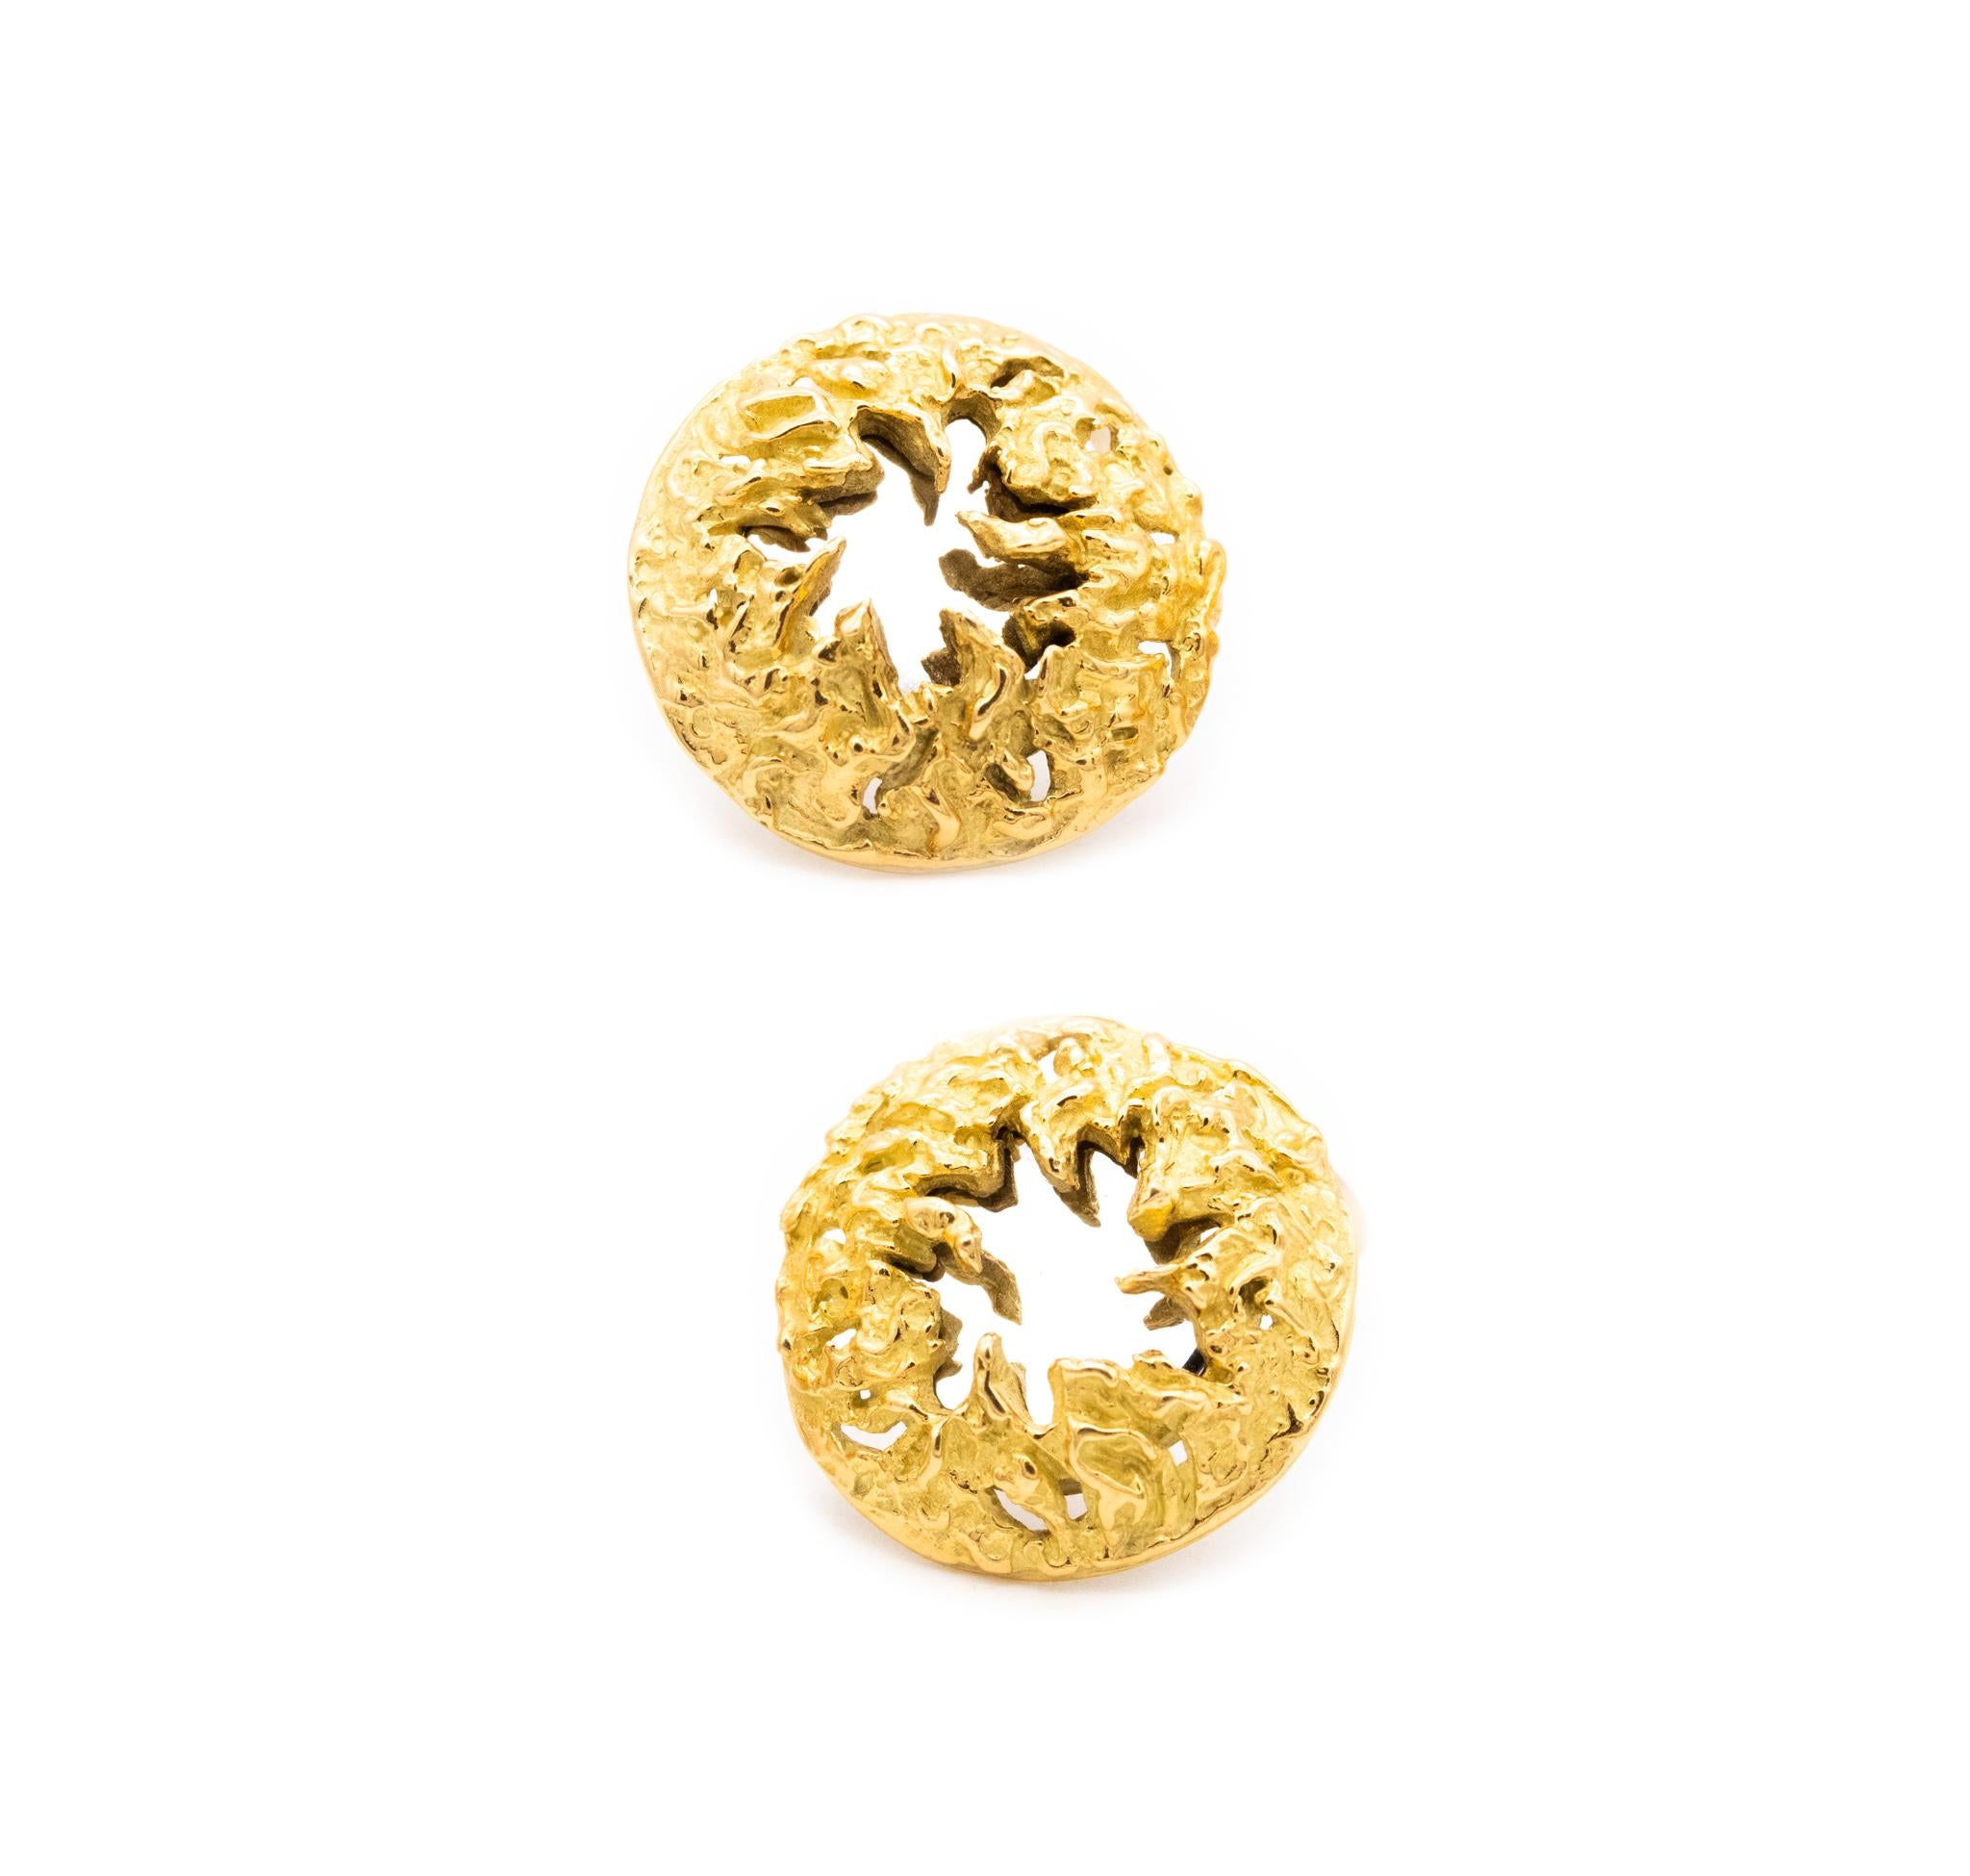 Chaumet 1970 Paris Retro Mirrored Clip Earrings in Textured 18Kt Yellow Gold For Sale 1